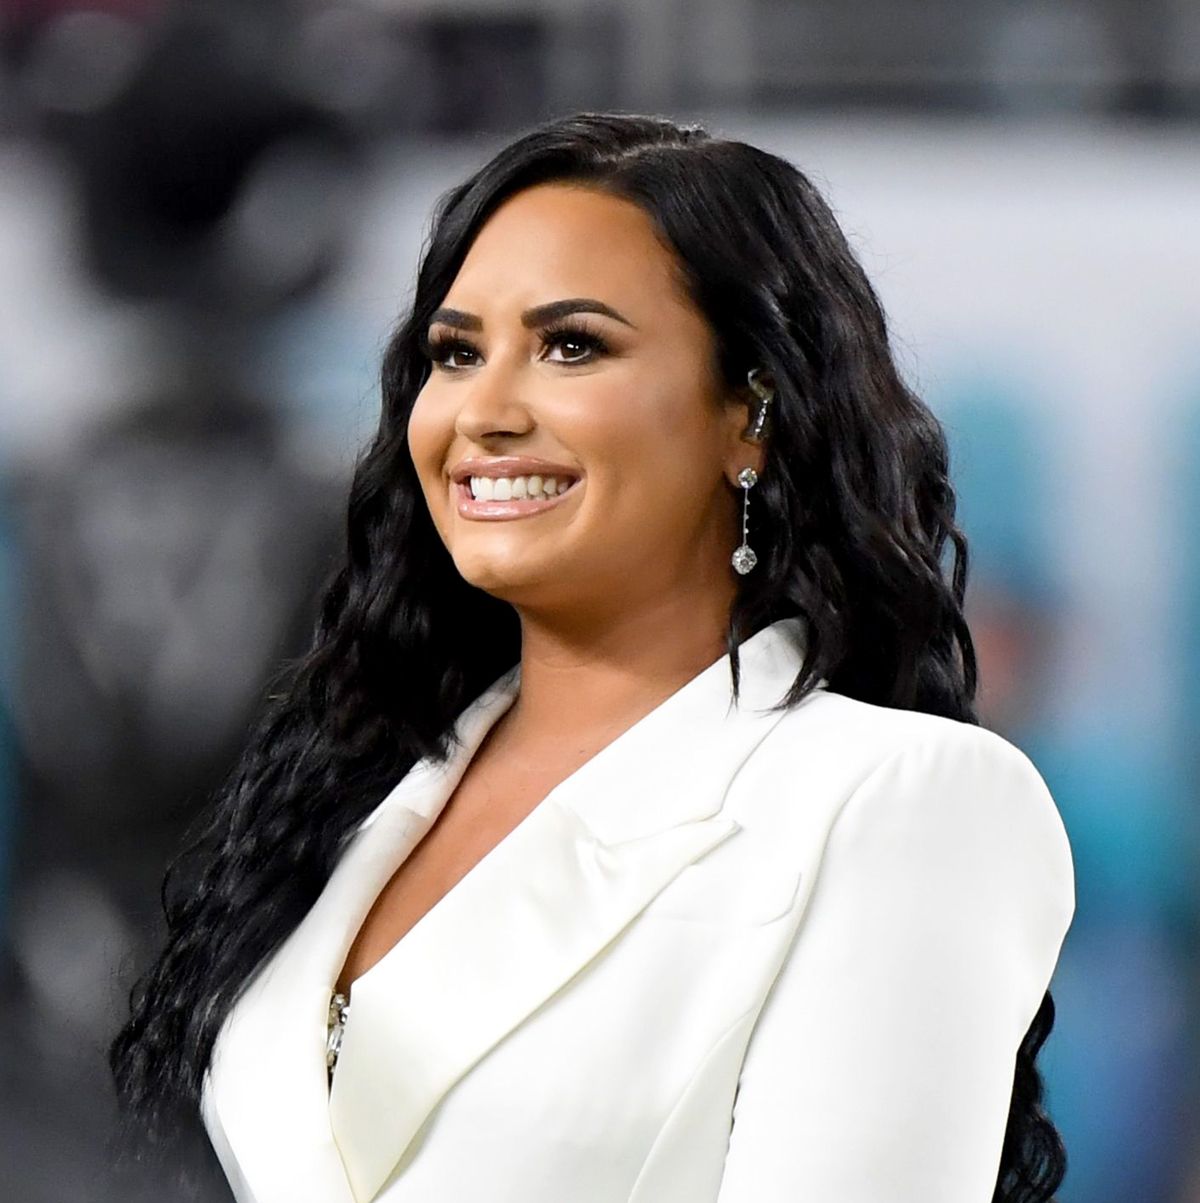 Demi Lovato Lesbian Sex - Demi Lovato Opens Up About Her Sexuality After Max Ehrich Split